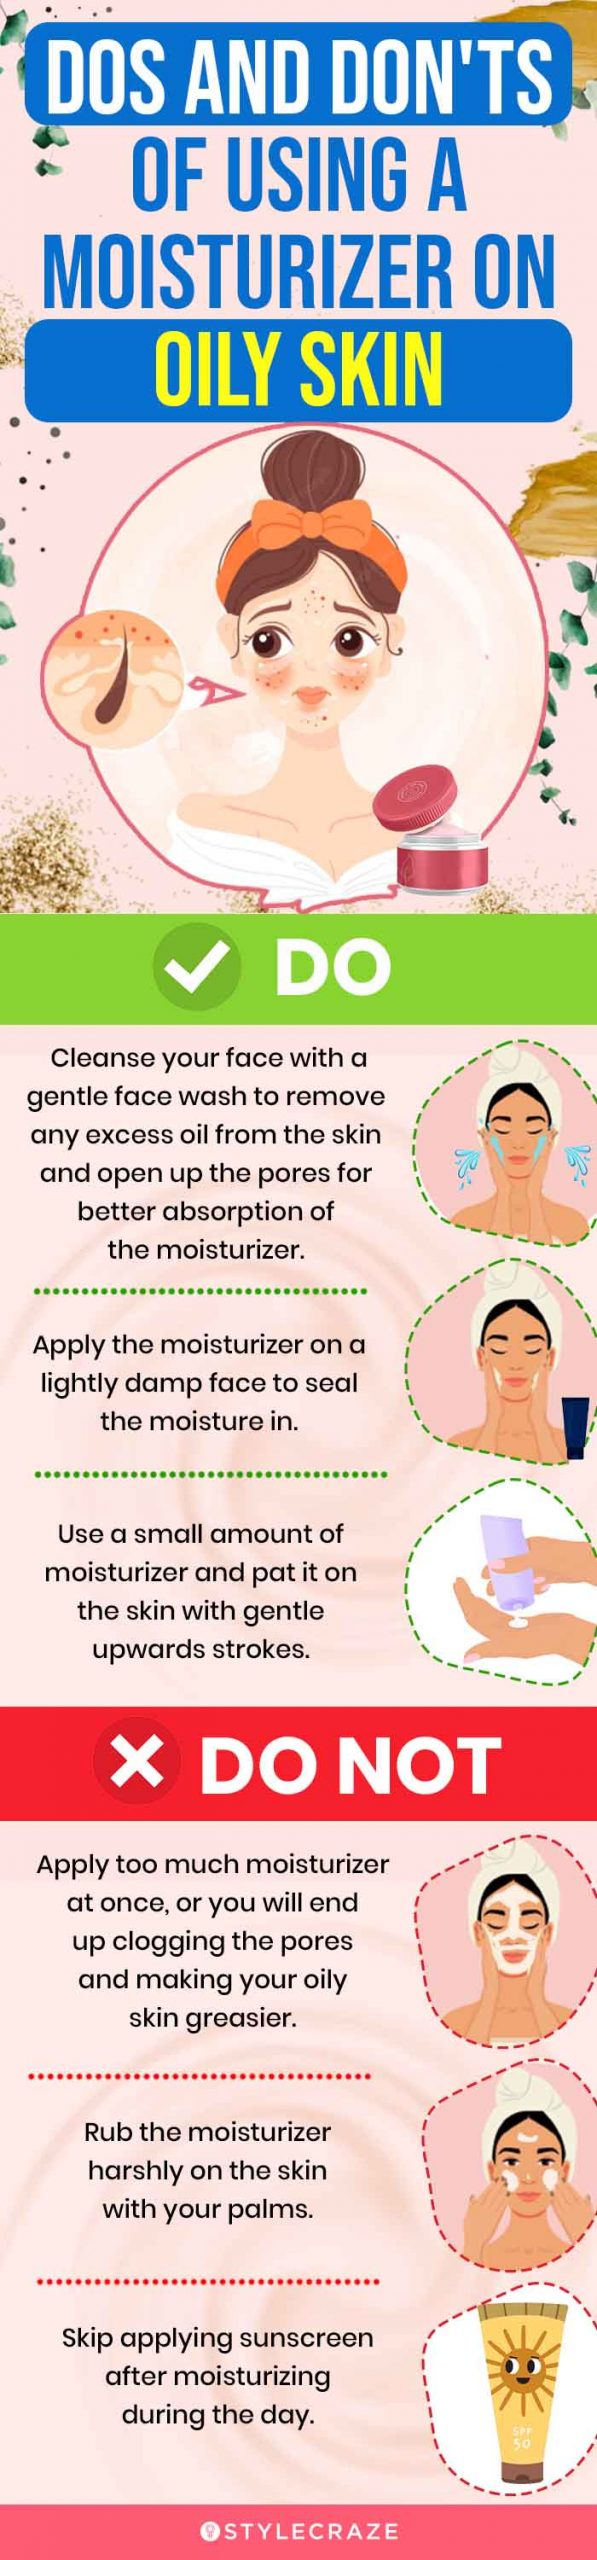 DOs And DON'Ts Of Using A Moisturizer On Oily Skin (infographic)